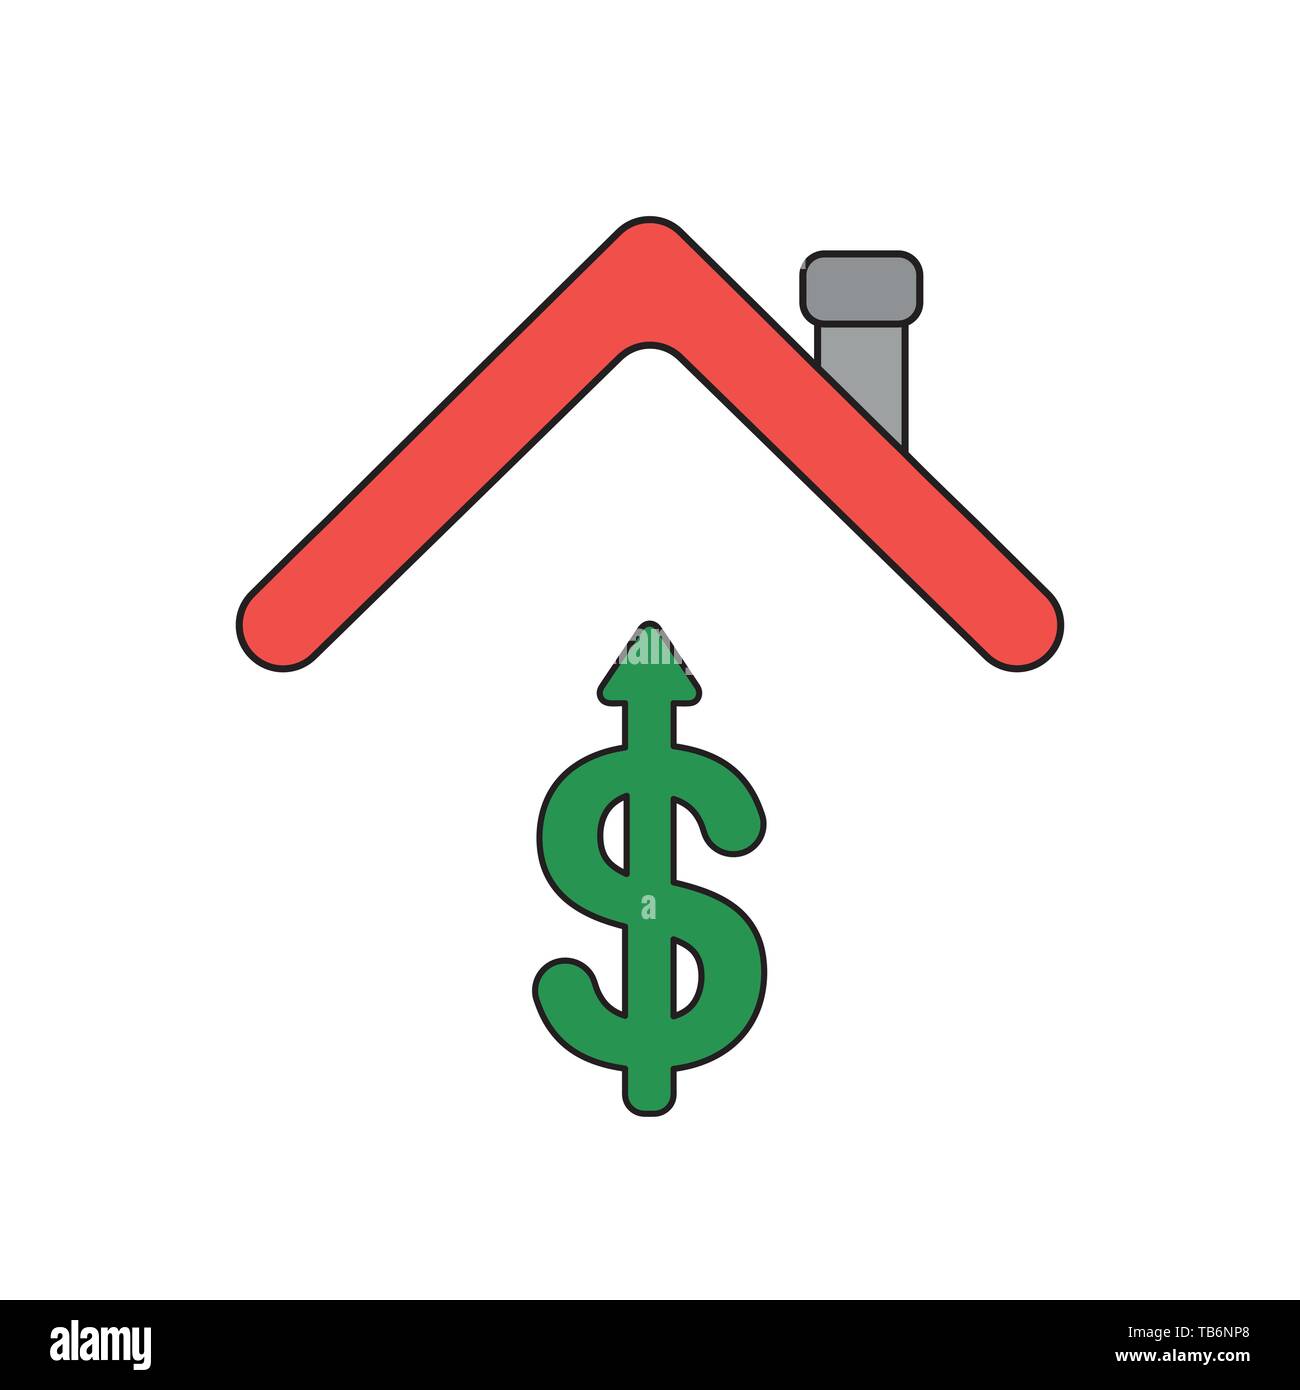 moving money sign